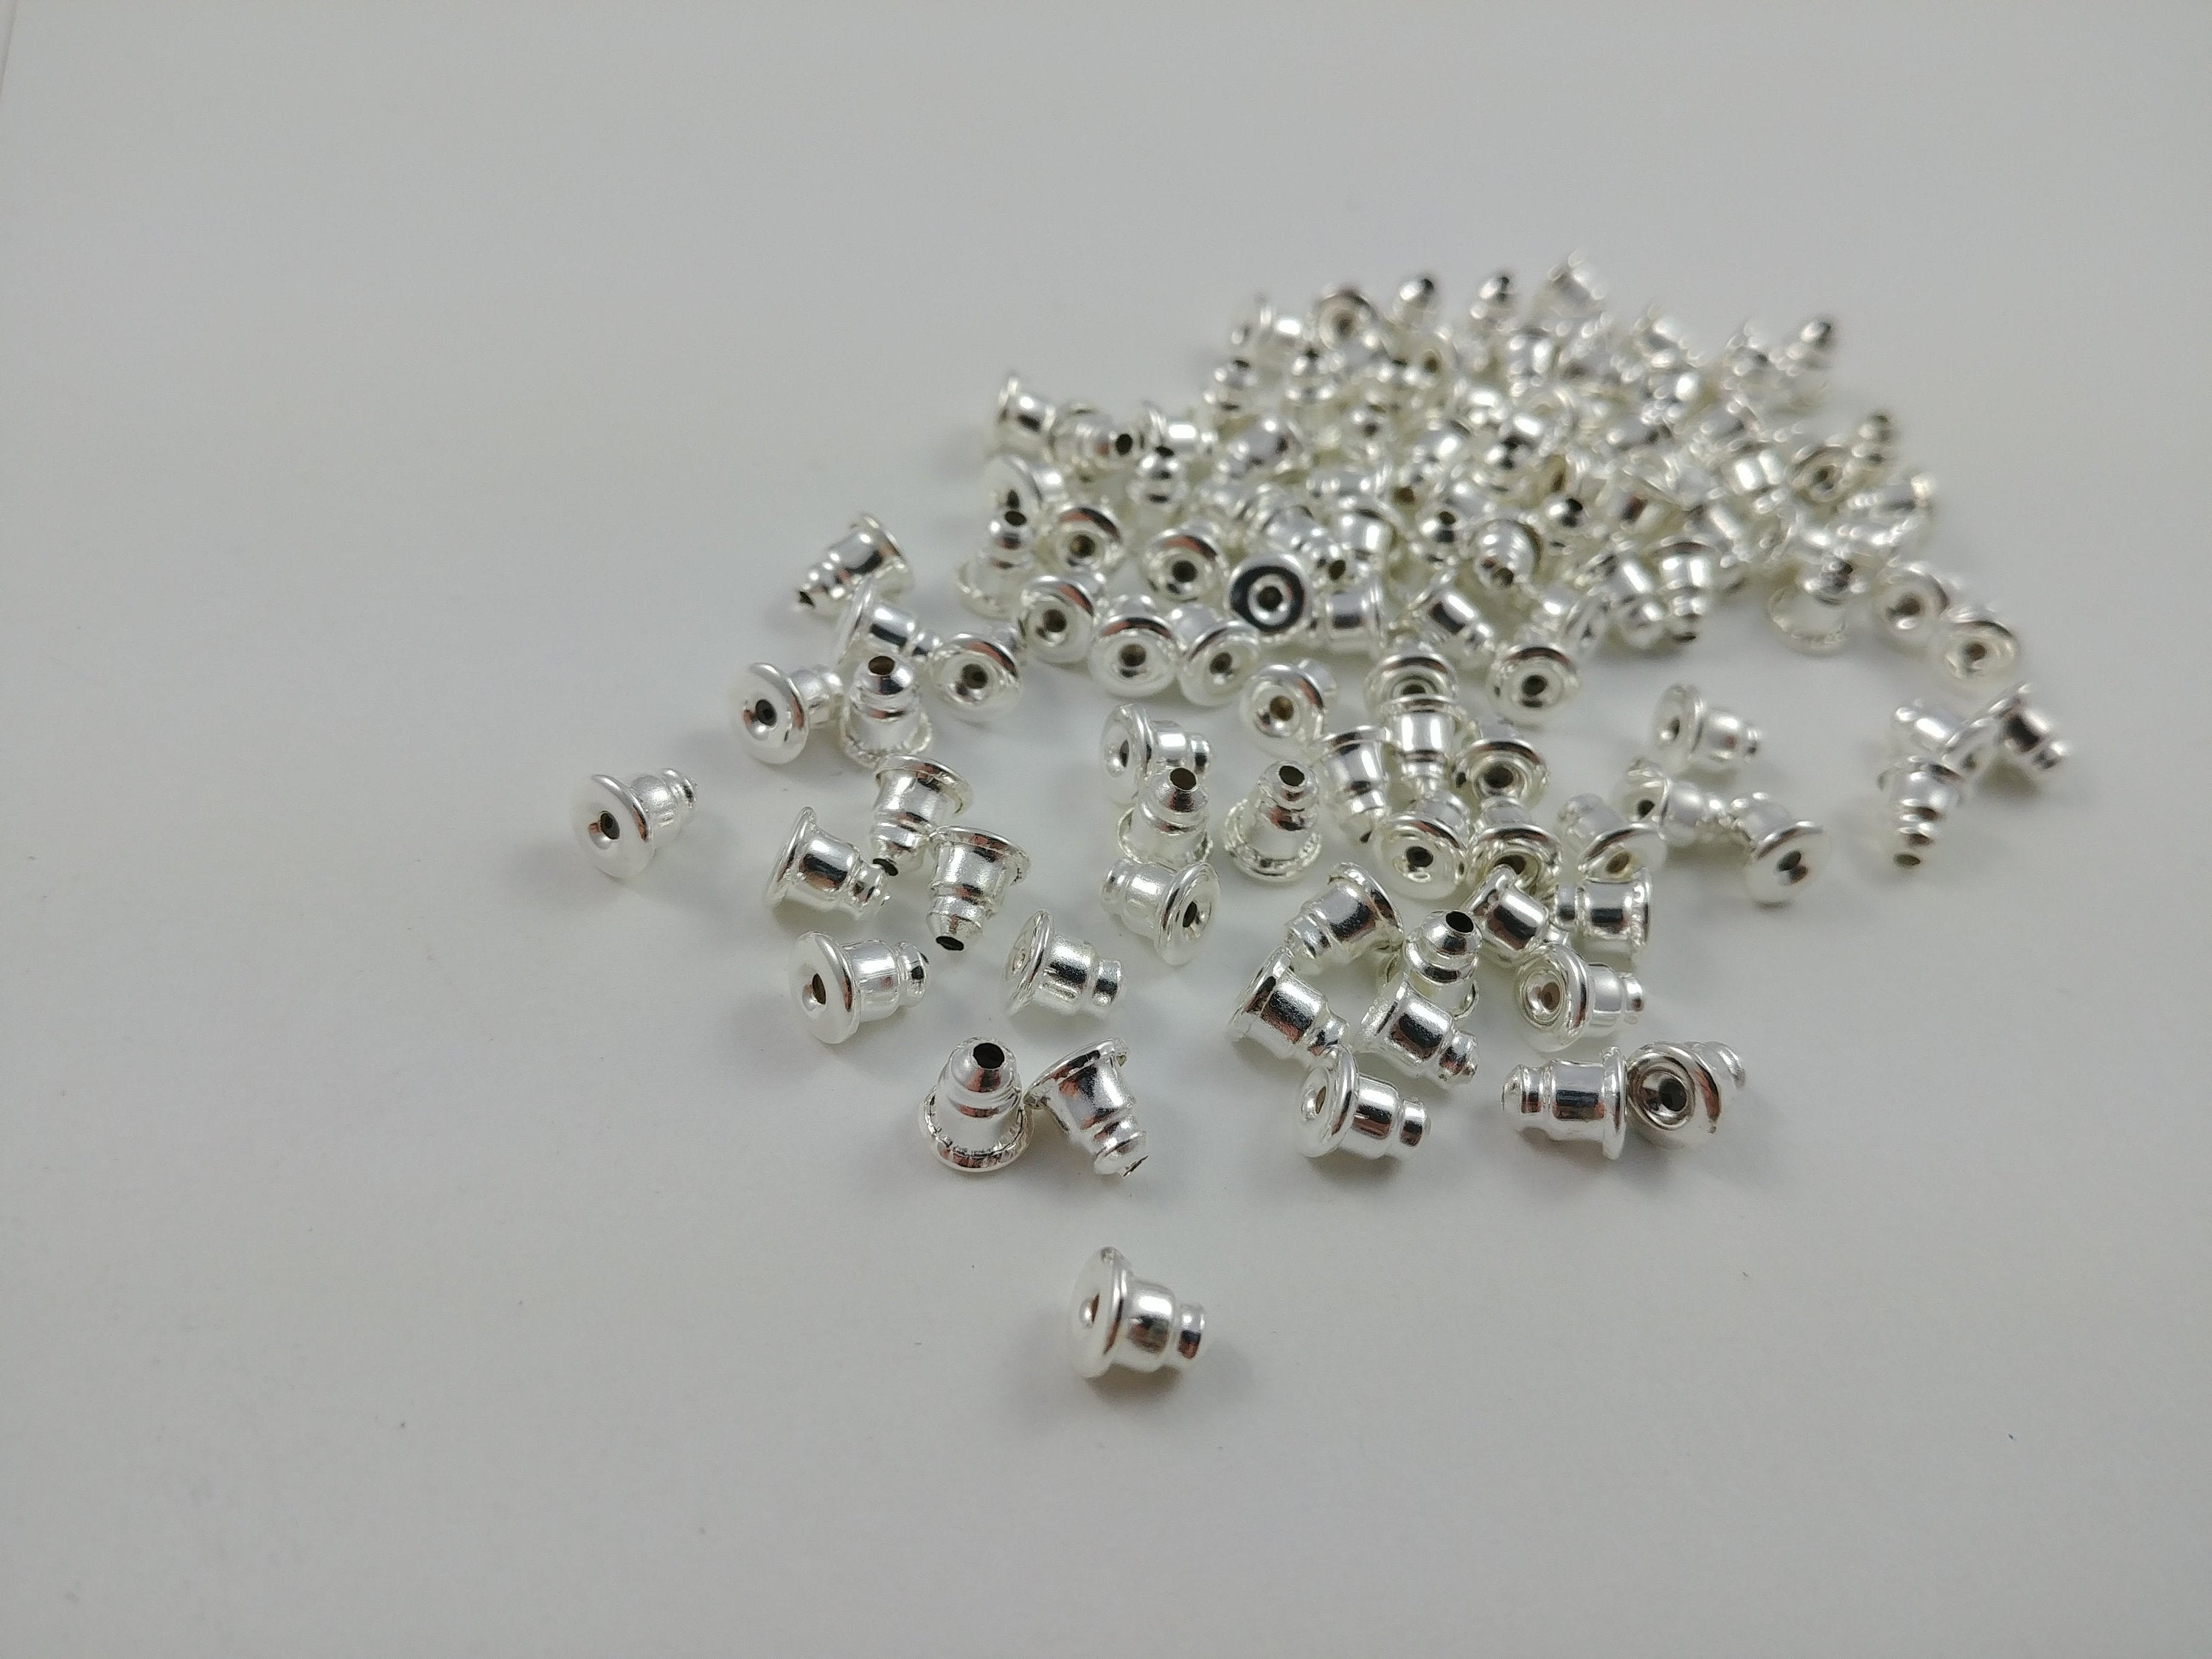 Brass earring nuts hypoallergenic 5mm. Nickel free, lead free and cadmium free